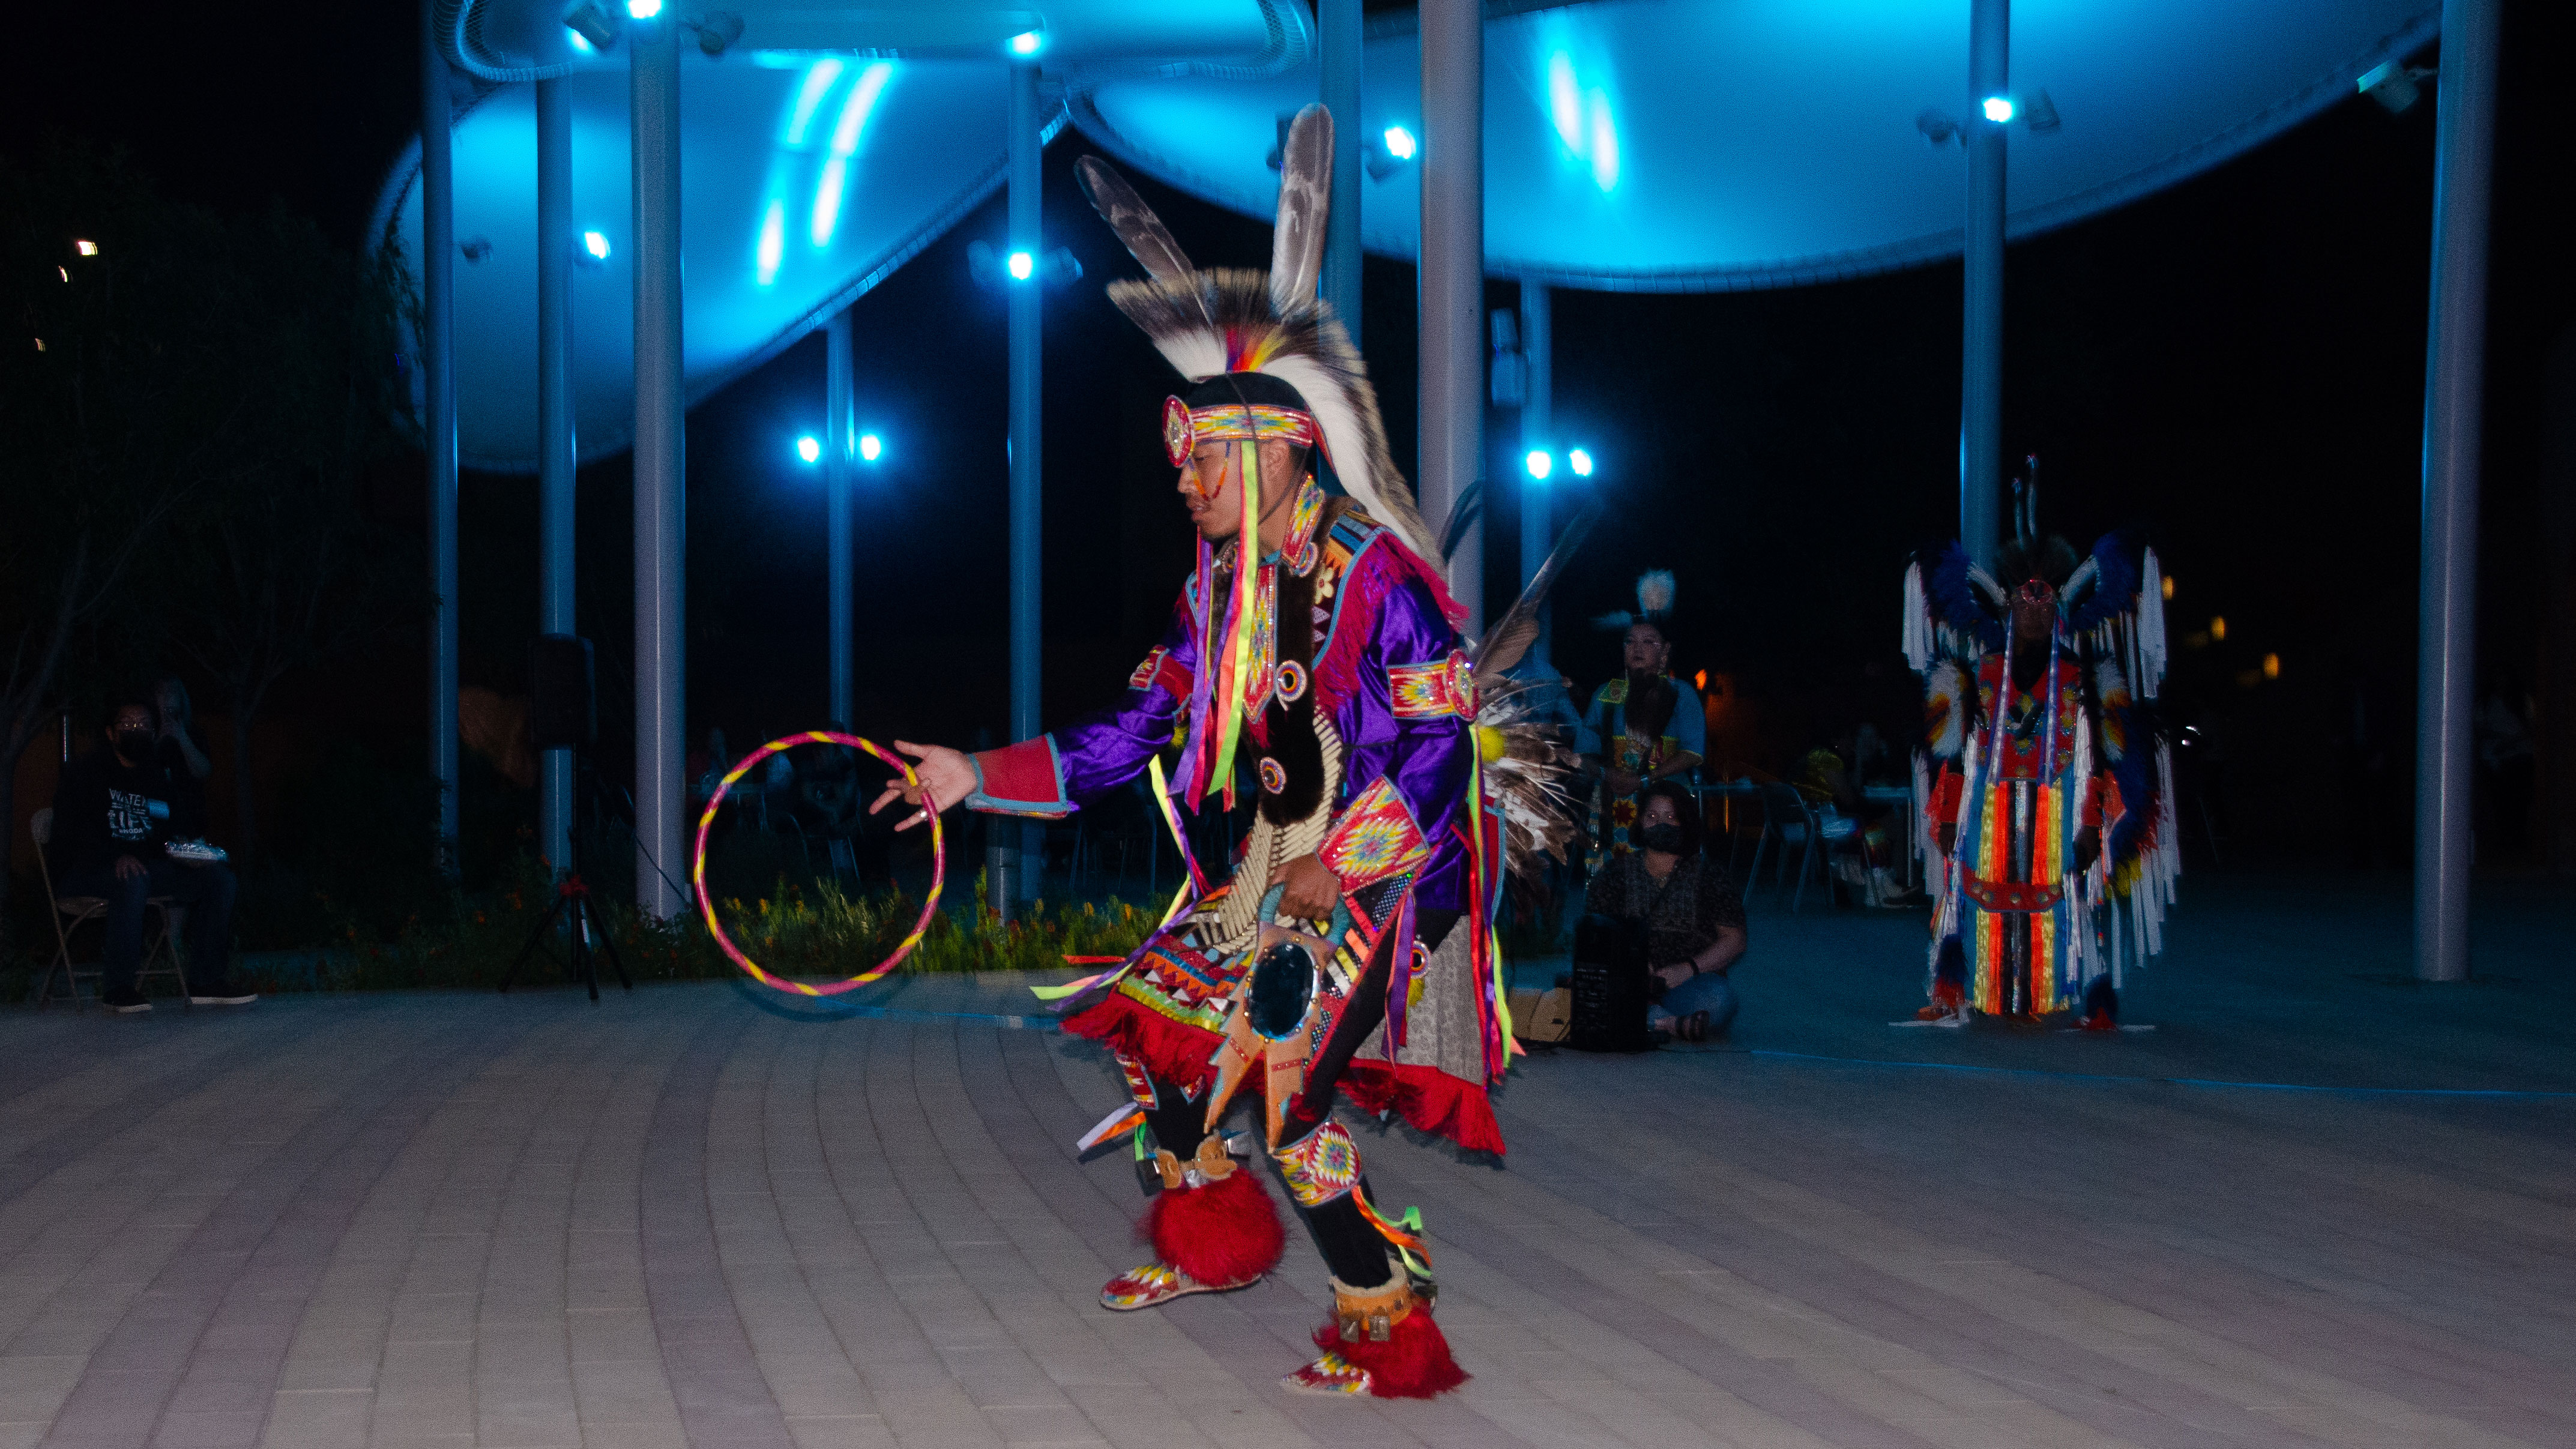 A Native American dancer in full regalia performs on an outdoor stage